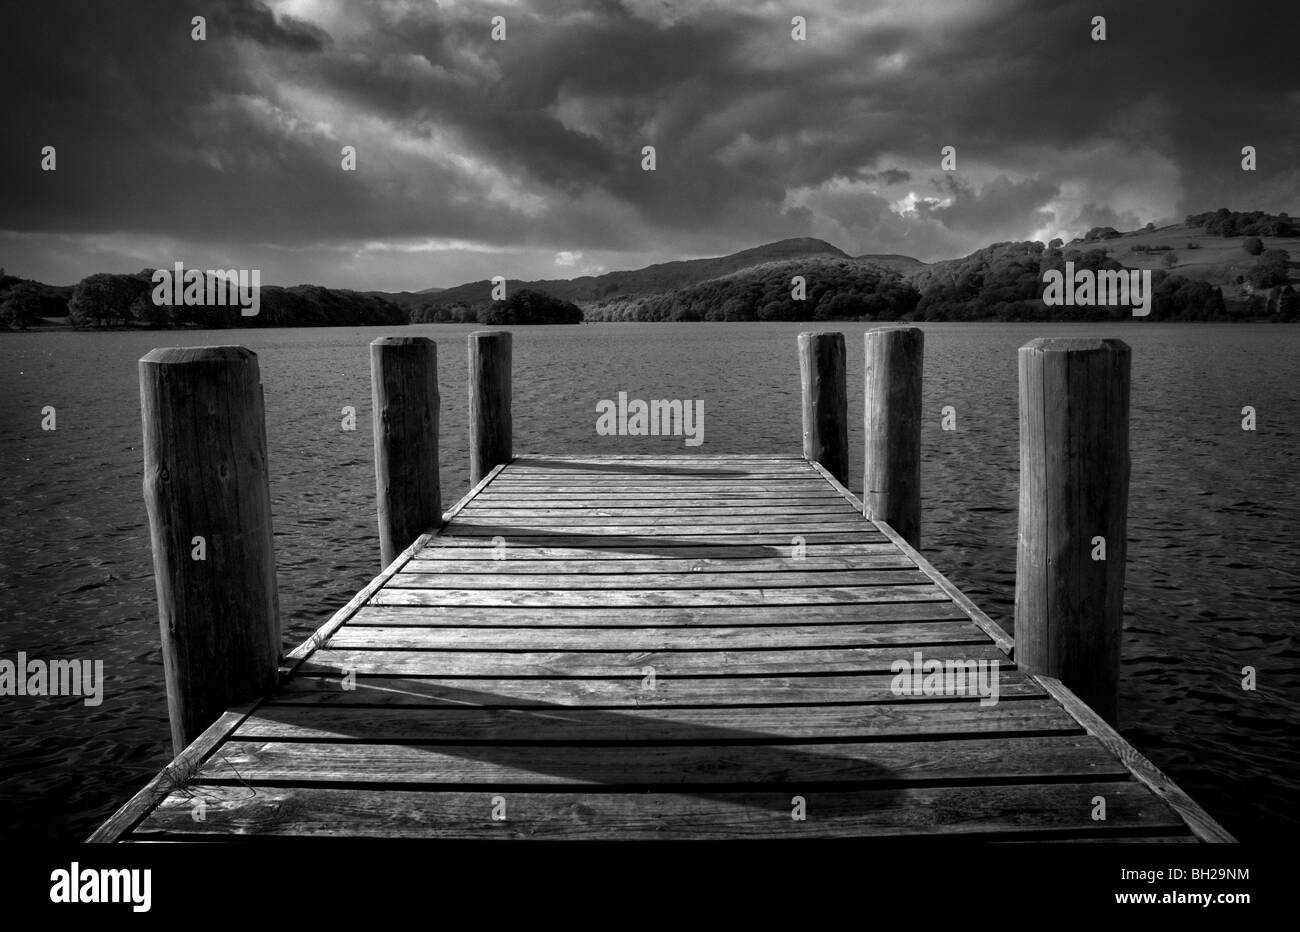 Monotone picture of a jetty reaching out into Coniston water in the lake district with dramatic clouds and sunlit low hills. Stock Photo